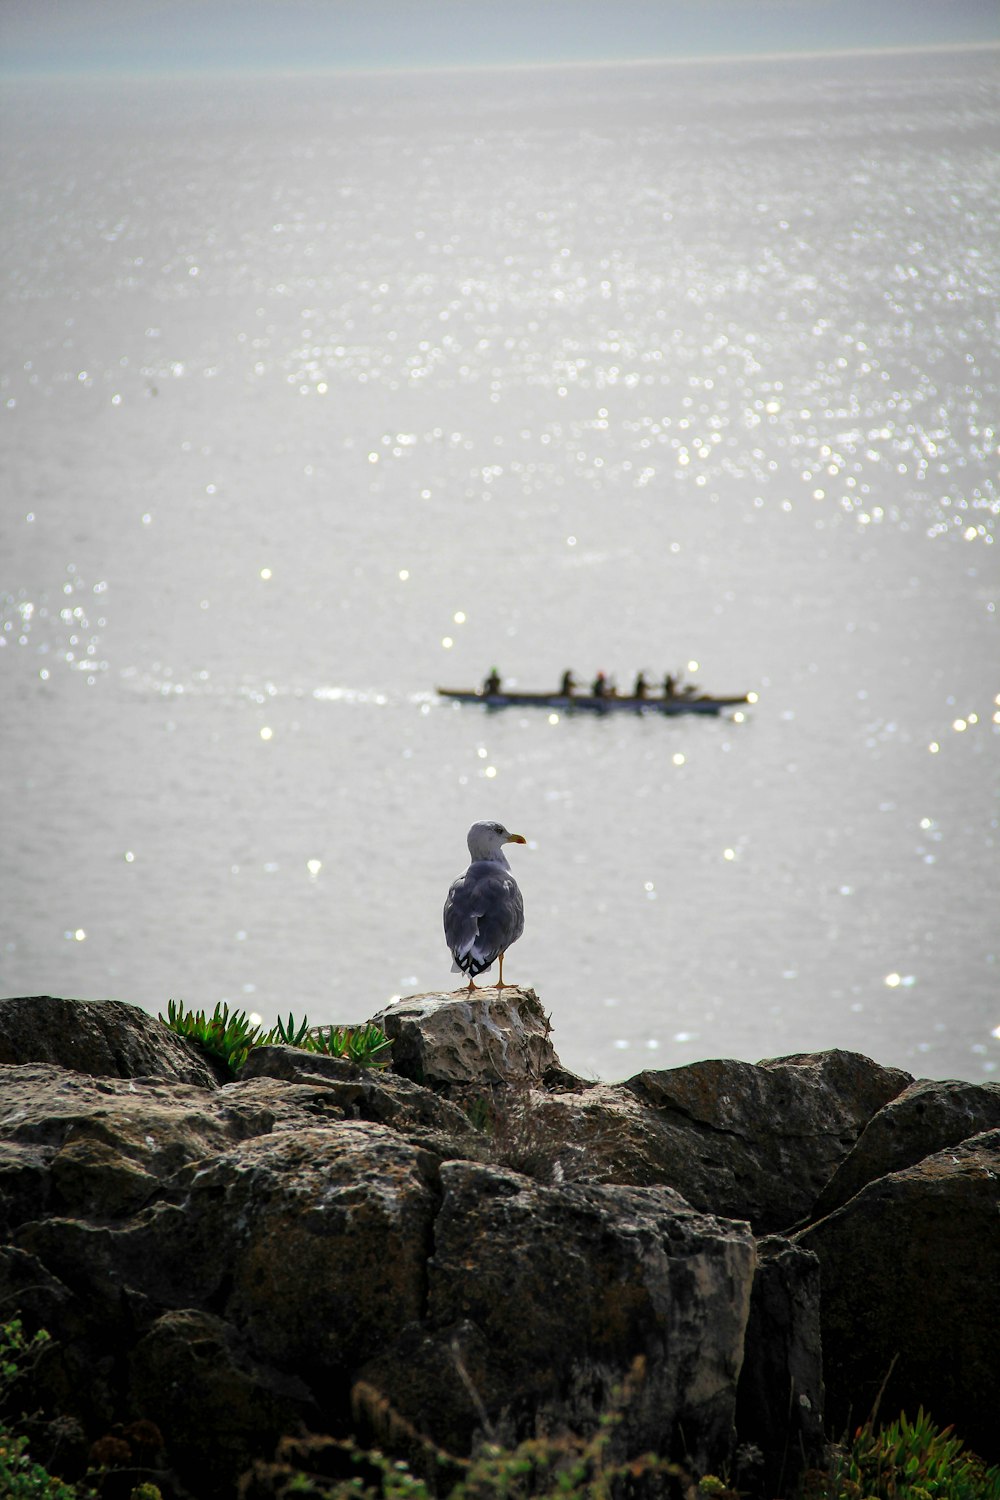 a bird on a rock by the water